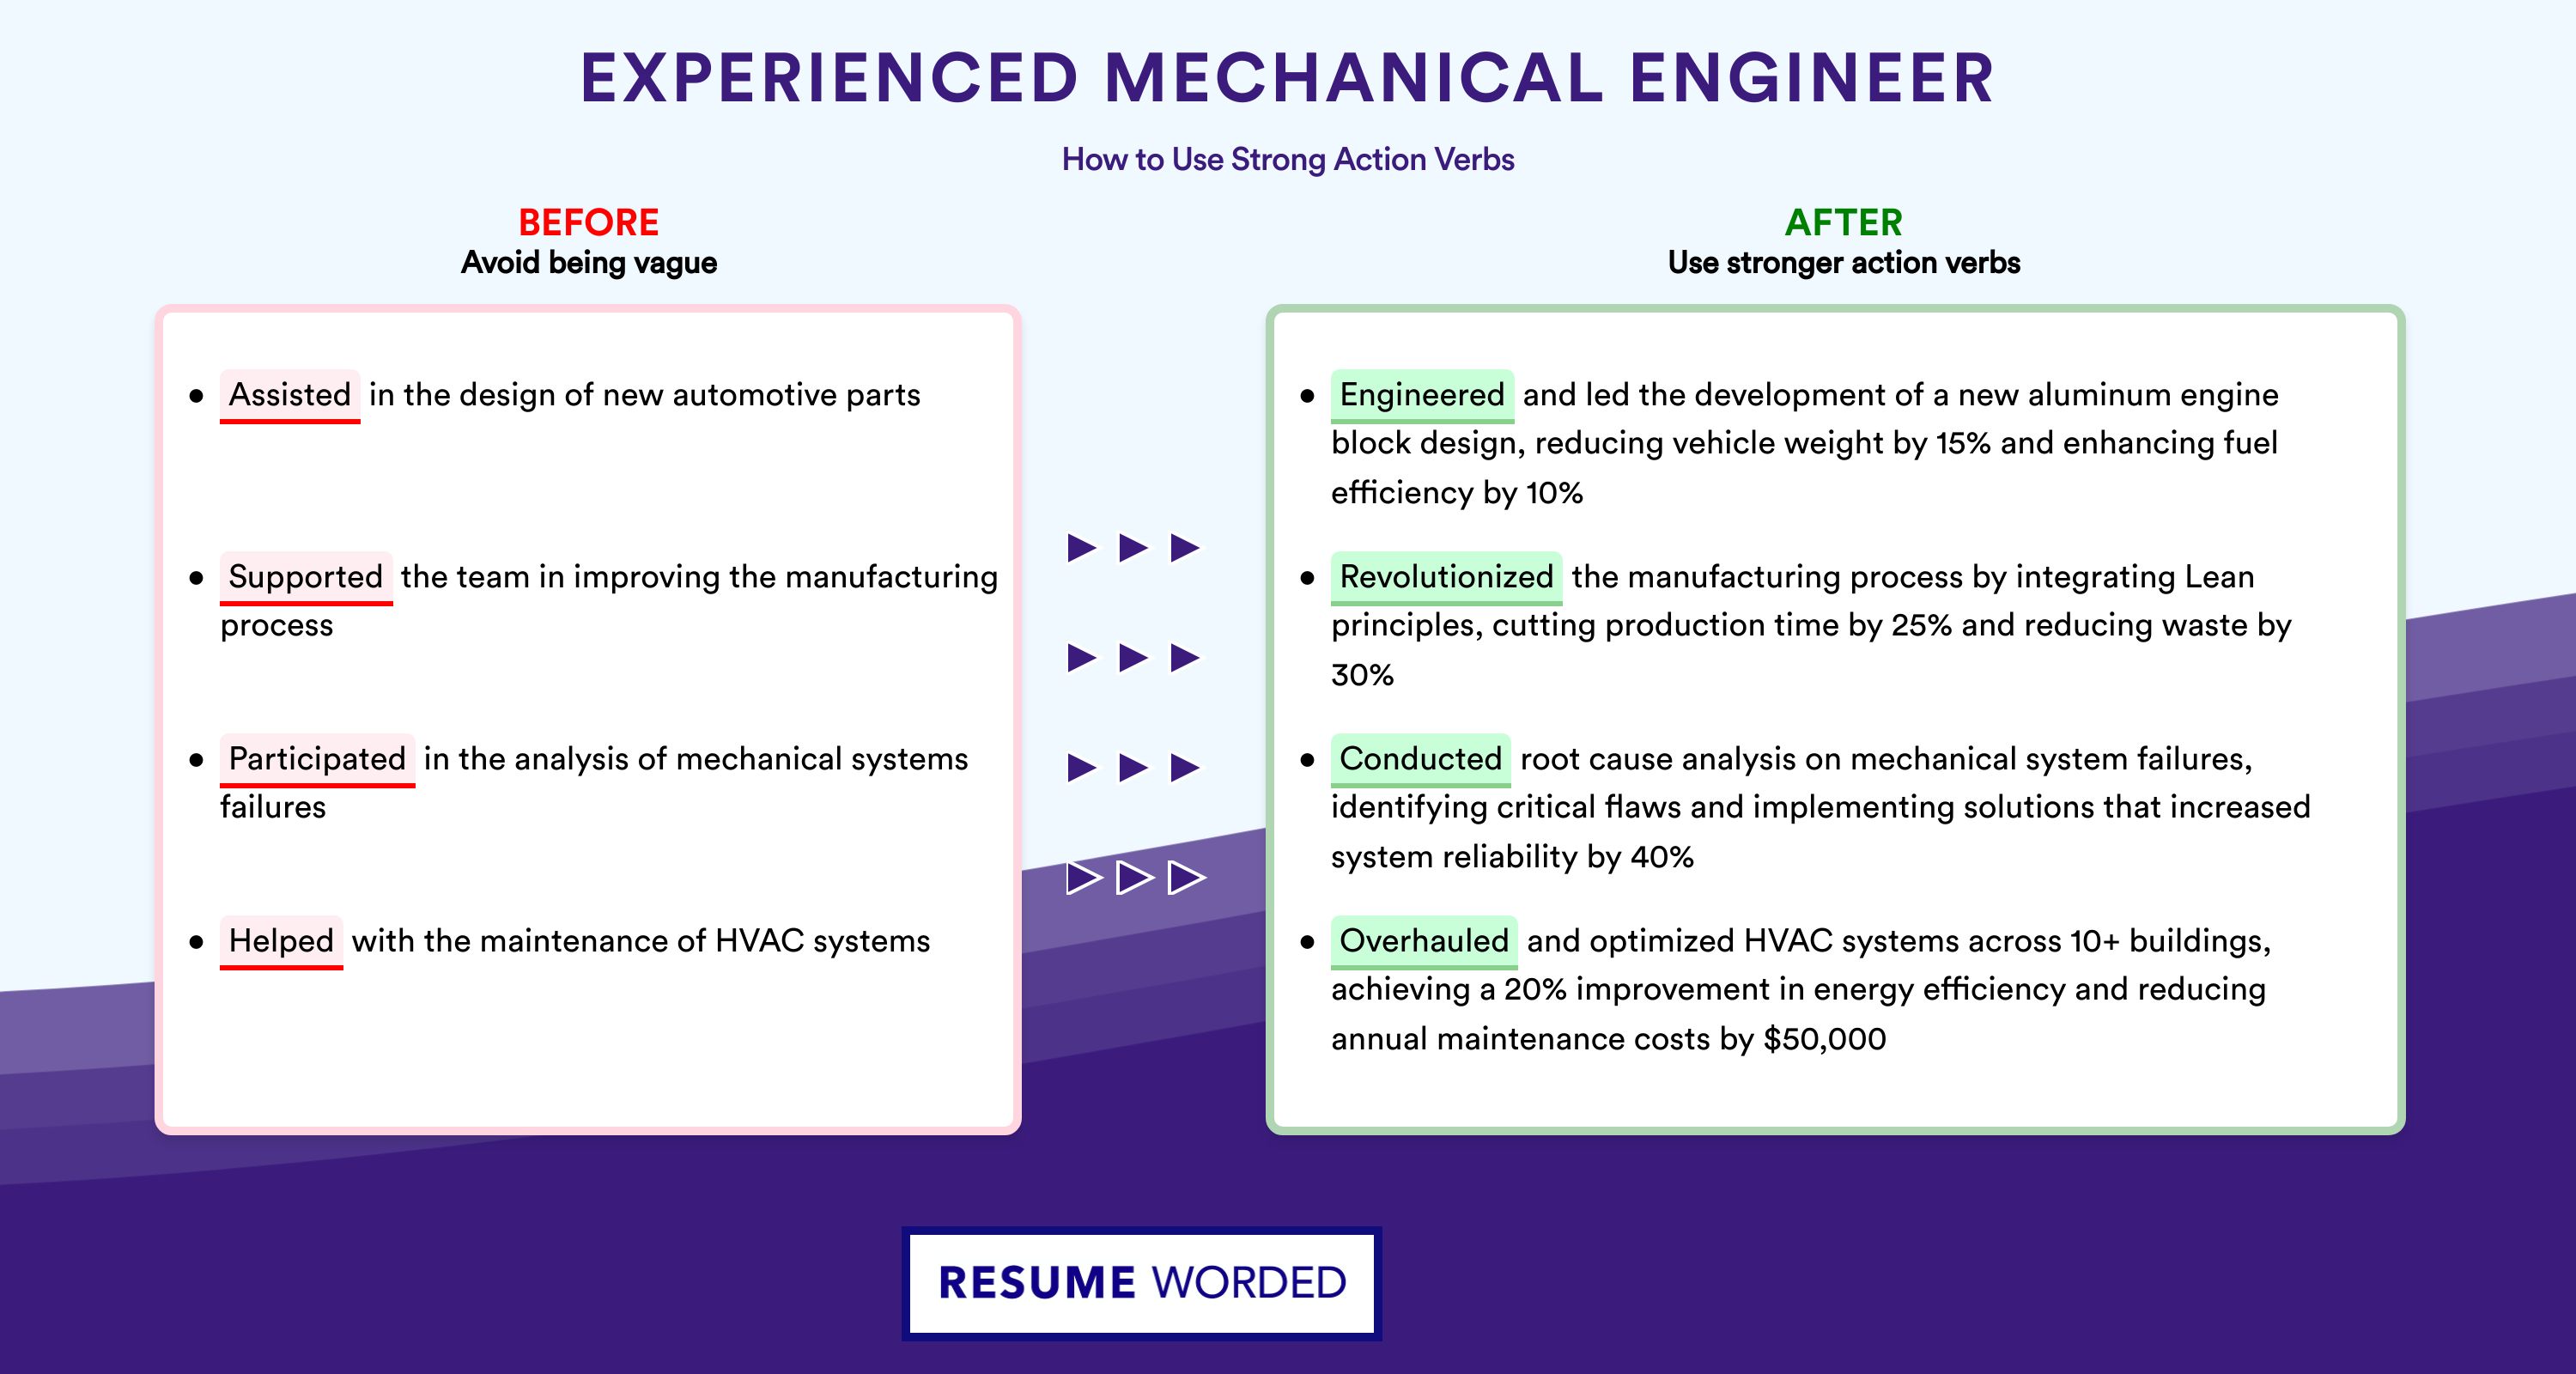 Action Verbs for Experienced Mechanical Engineer